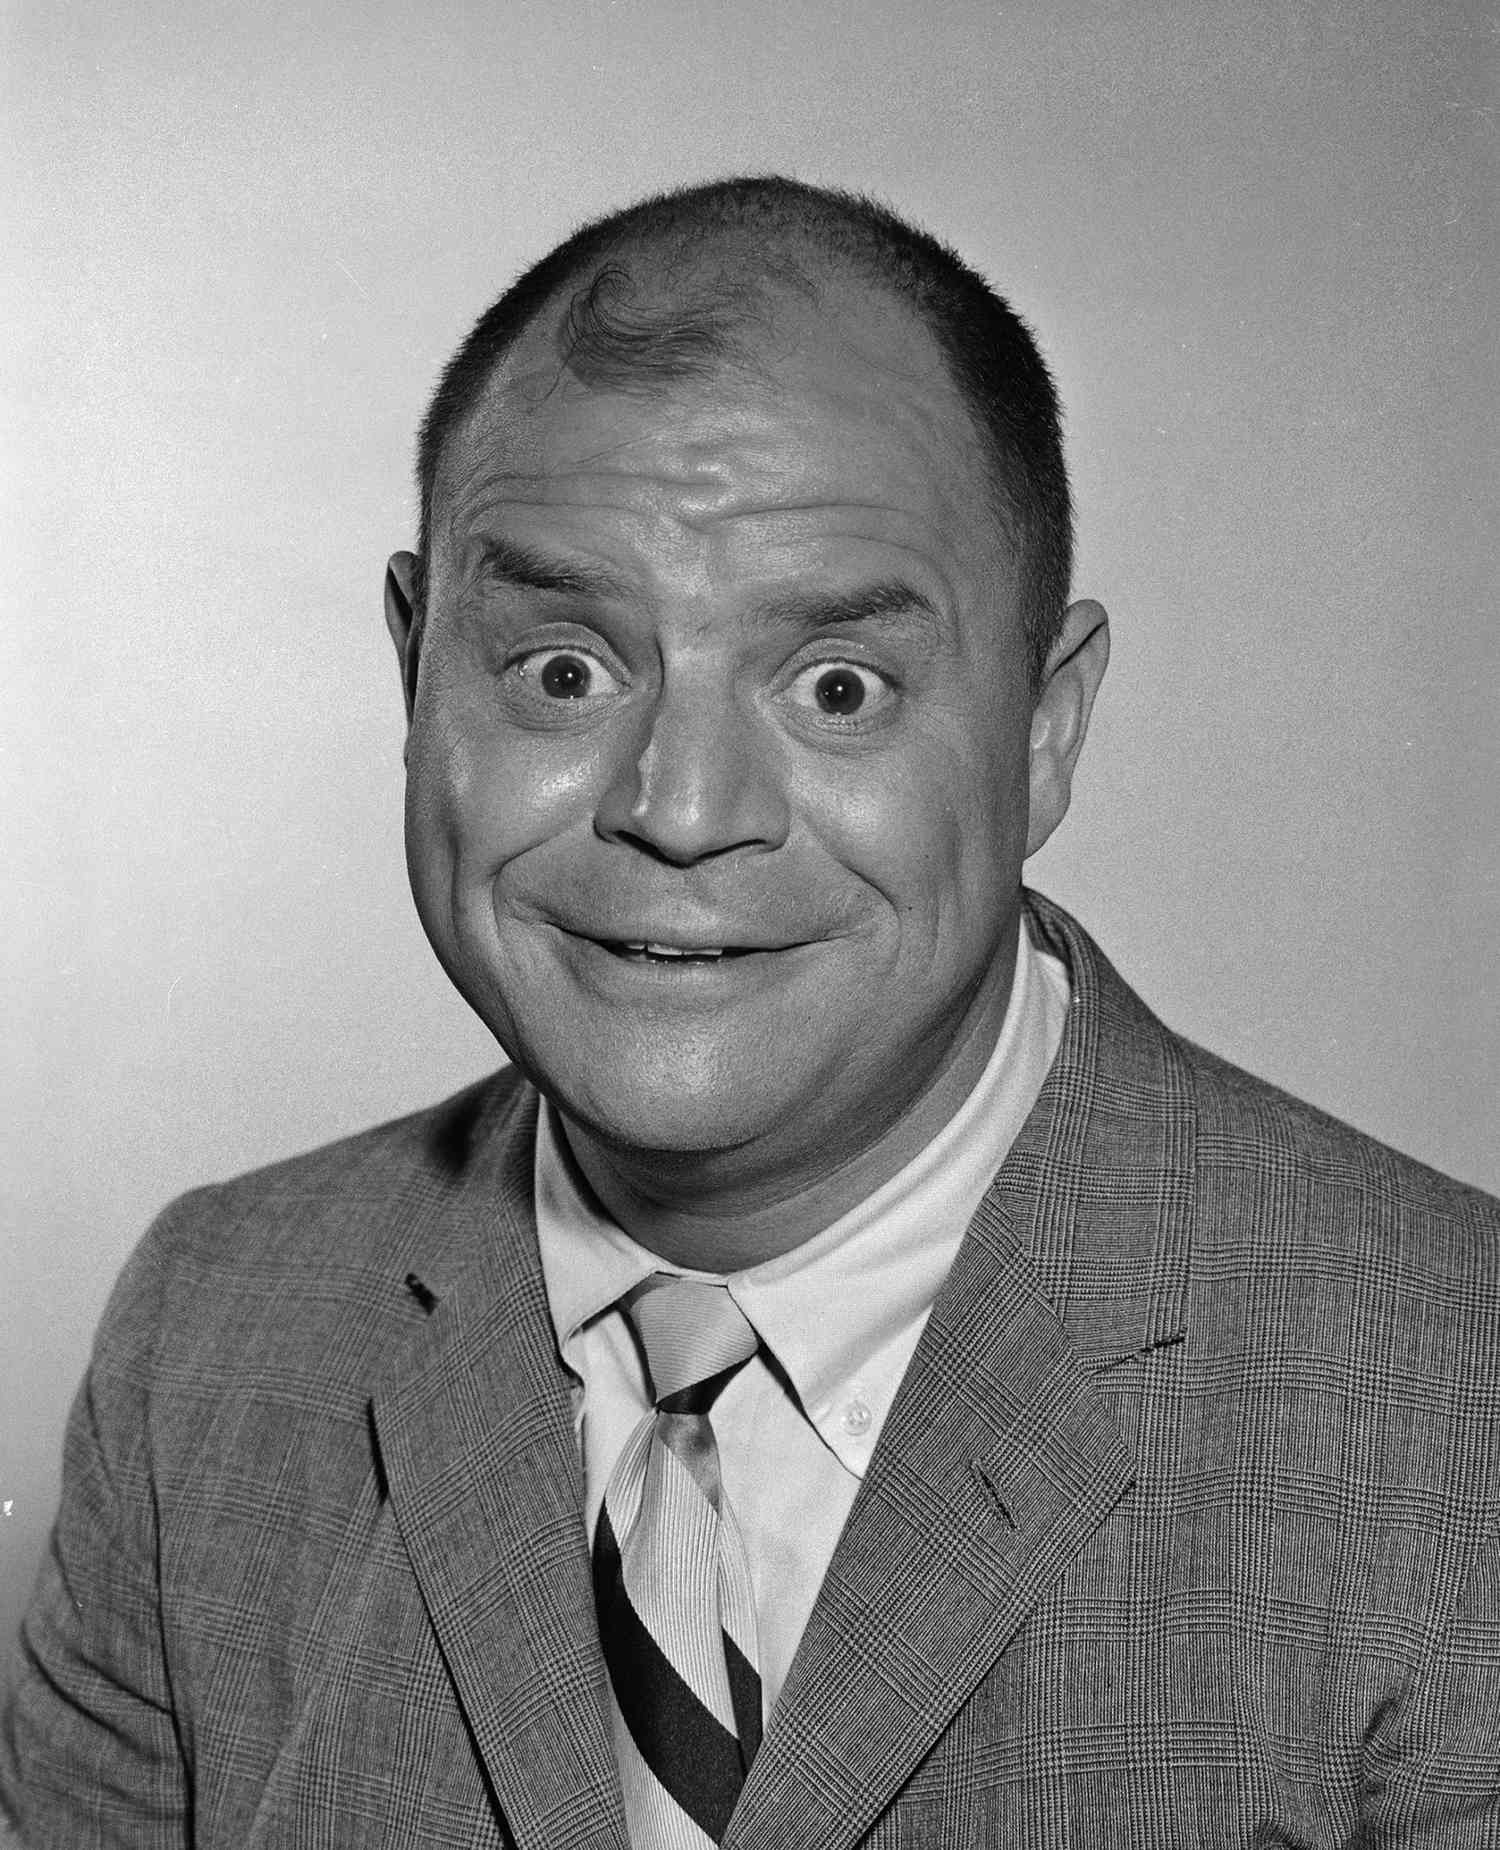 Don Rickles on The Twilight Zone on&nbsp;July 29, 1960